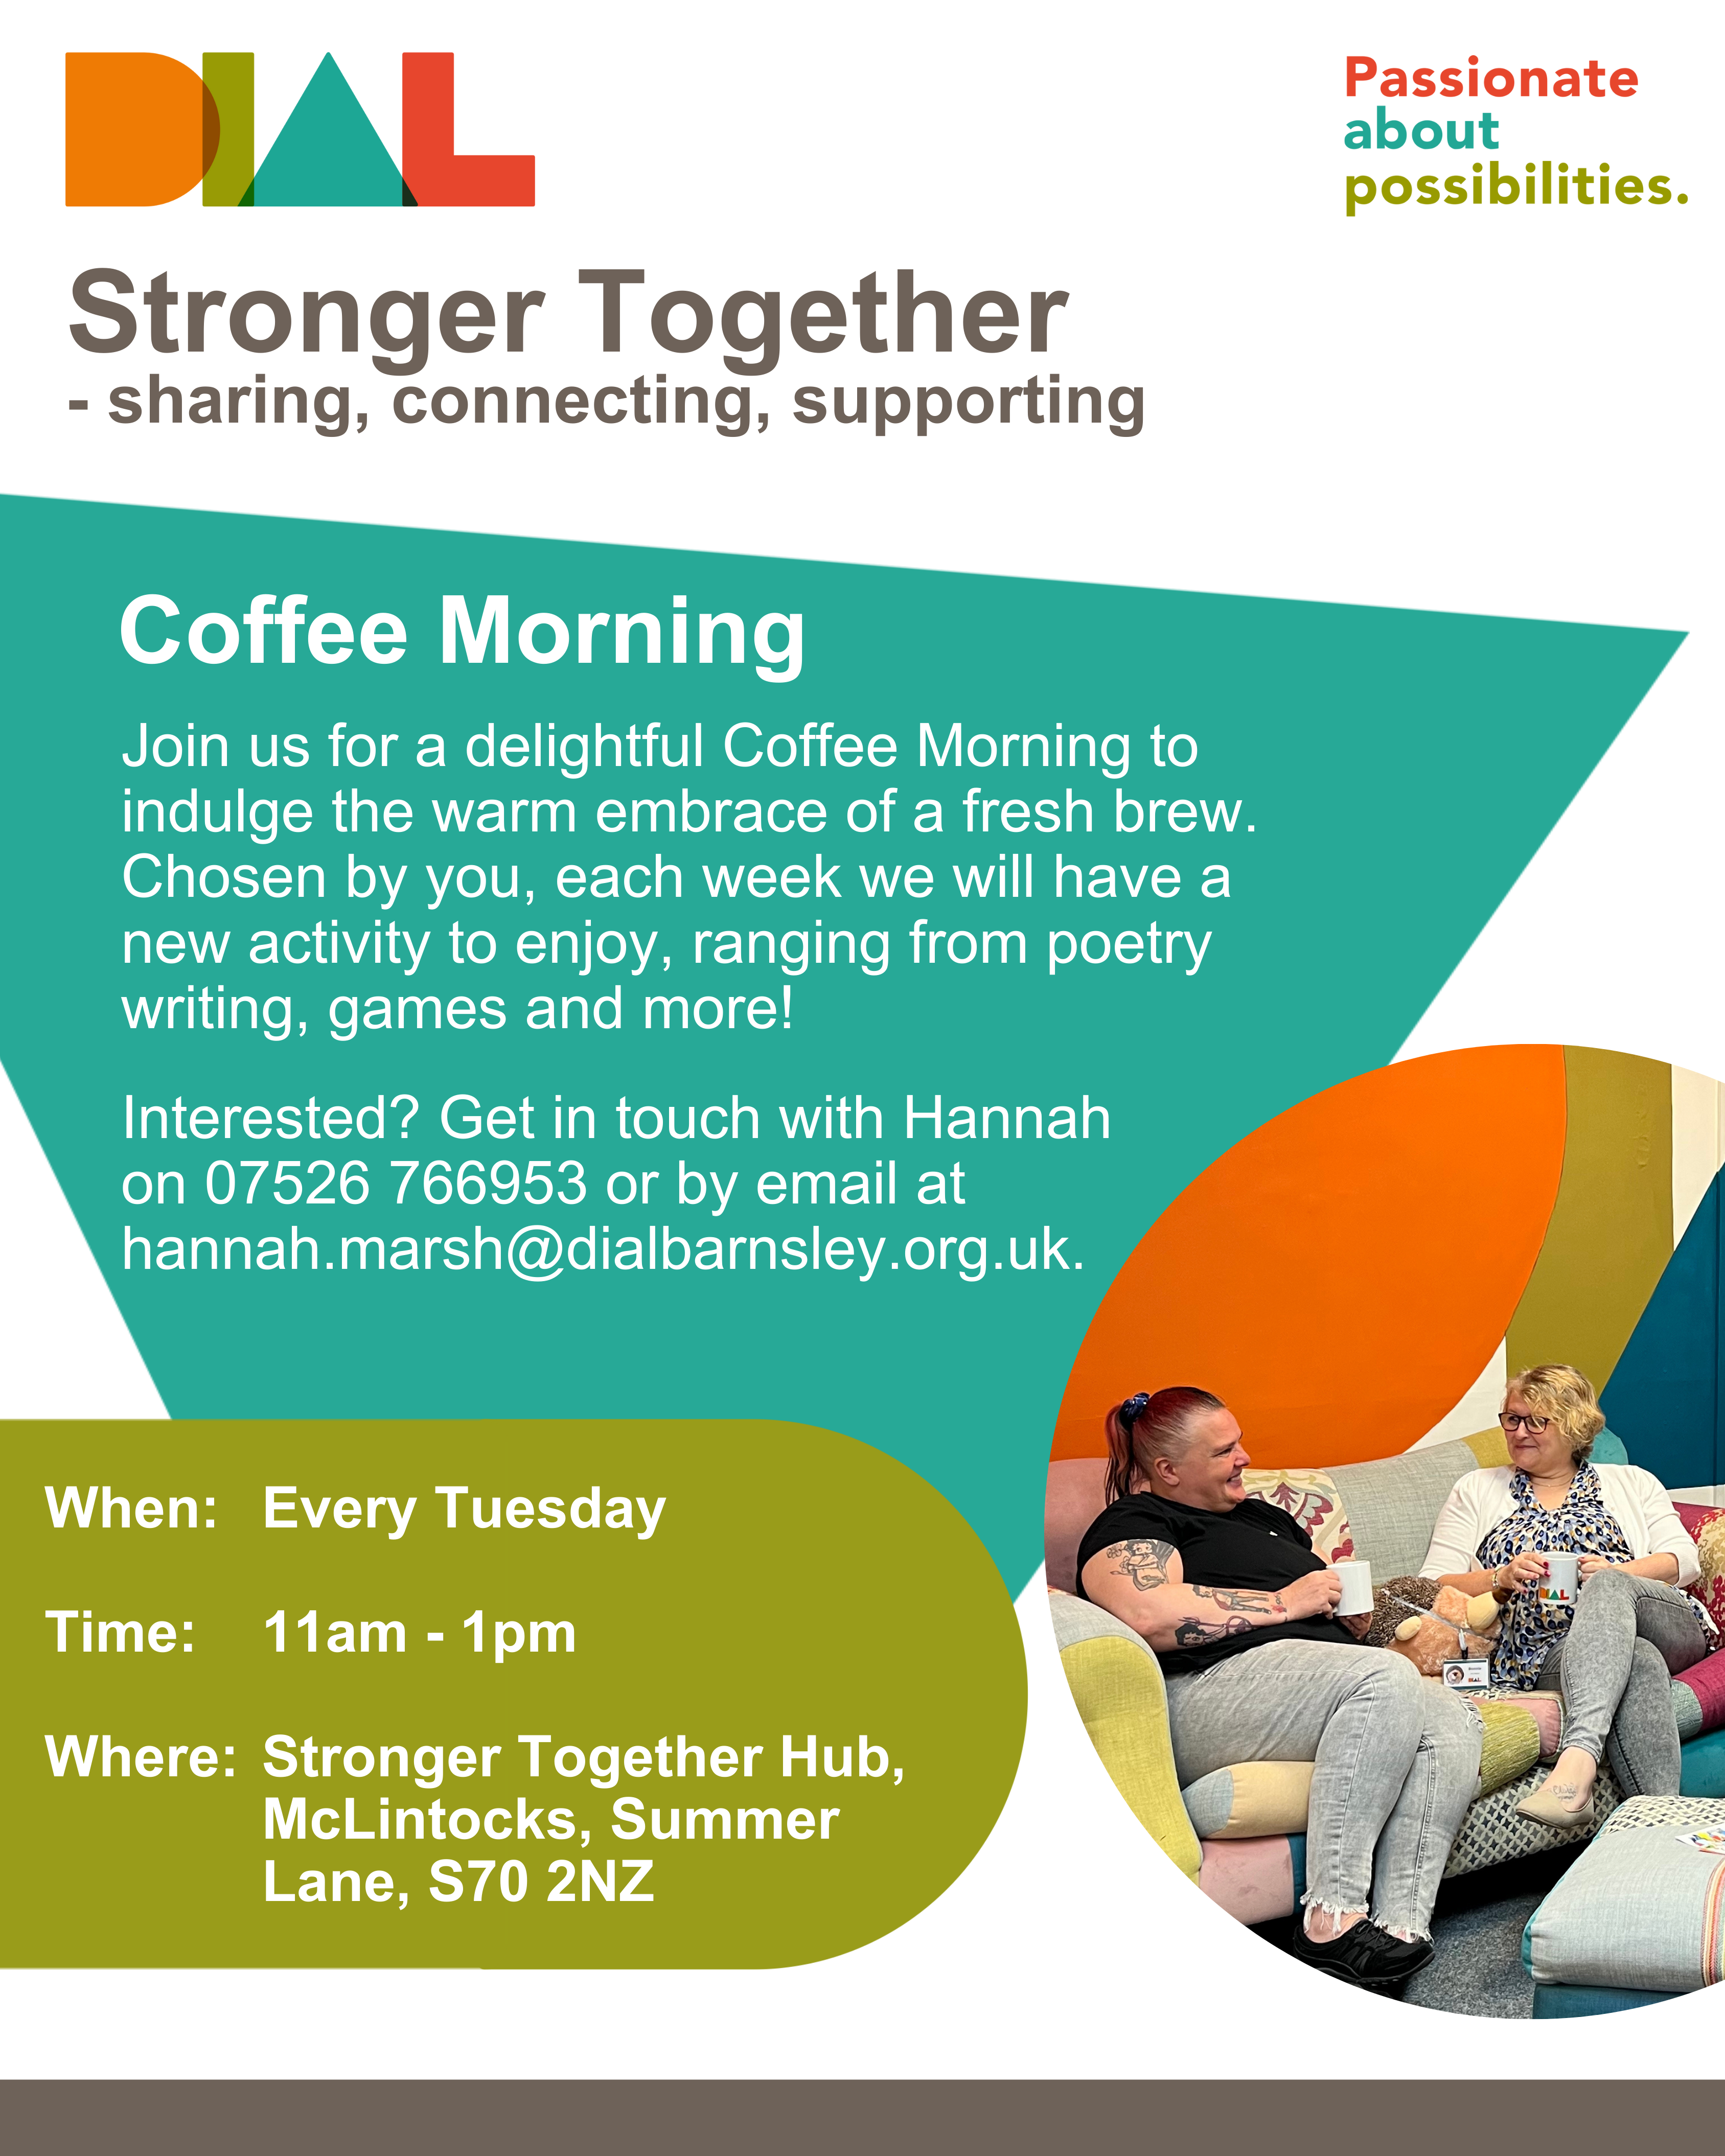 A poster for our Stronger Together Coffee Mornings. A white background and using DIAL colours of orange, green, teal and red. The poster includes the DIAL logo, each letter of DIAL being a different DIAL colour, and the tagline of ‘Passionate About Possibilities’. There is also an image of two white women sitting on the colourful patchwork sofa in our Stronger Together Hub, having a cuppa and chatting.The poster reads: Stronger Together - sharing, connecting, supporting. Join us for a delightful coffee morning to indulge the warm embrace of a fresh brew. Chosen by you, each week we will have a new activity to enjoy, ranging from poetry writing, games and more!Interested? Get in touch with Hannah on 07526 766953 or by email at hannah.marsh@dialbarnsley.org.uk.When: Tuesday , 11am - 1pm.
Where: Stronger Together Hub, DIAL Office, McLintocks, Summer Lane, S70 2NZ.